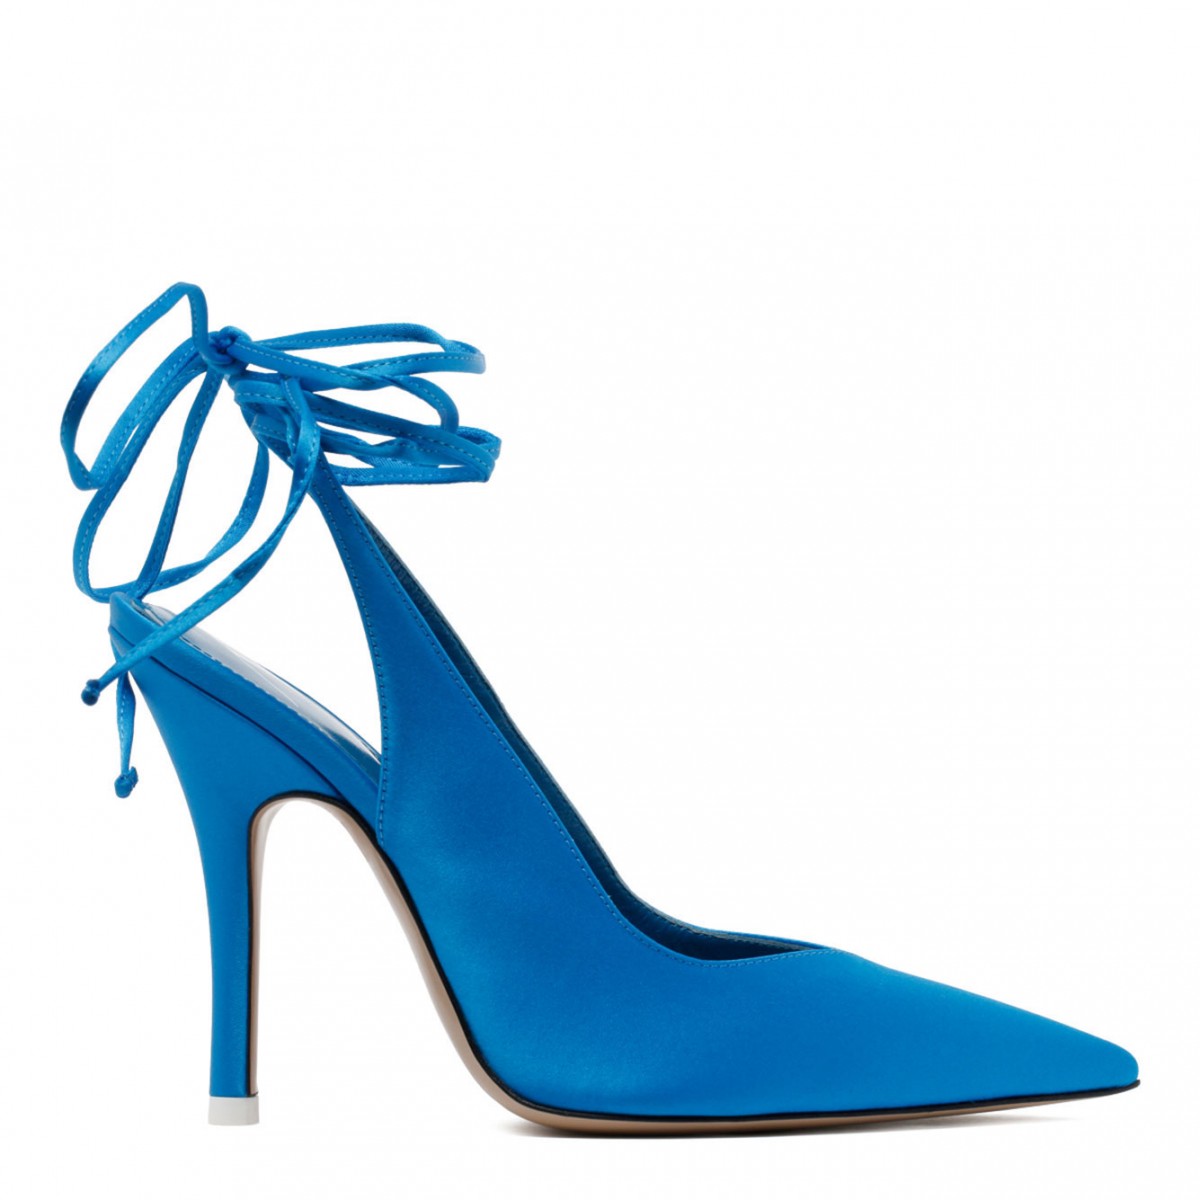 The Attico Turquoise Fabric and Leather Ankle Tied Pumps